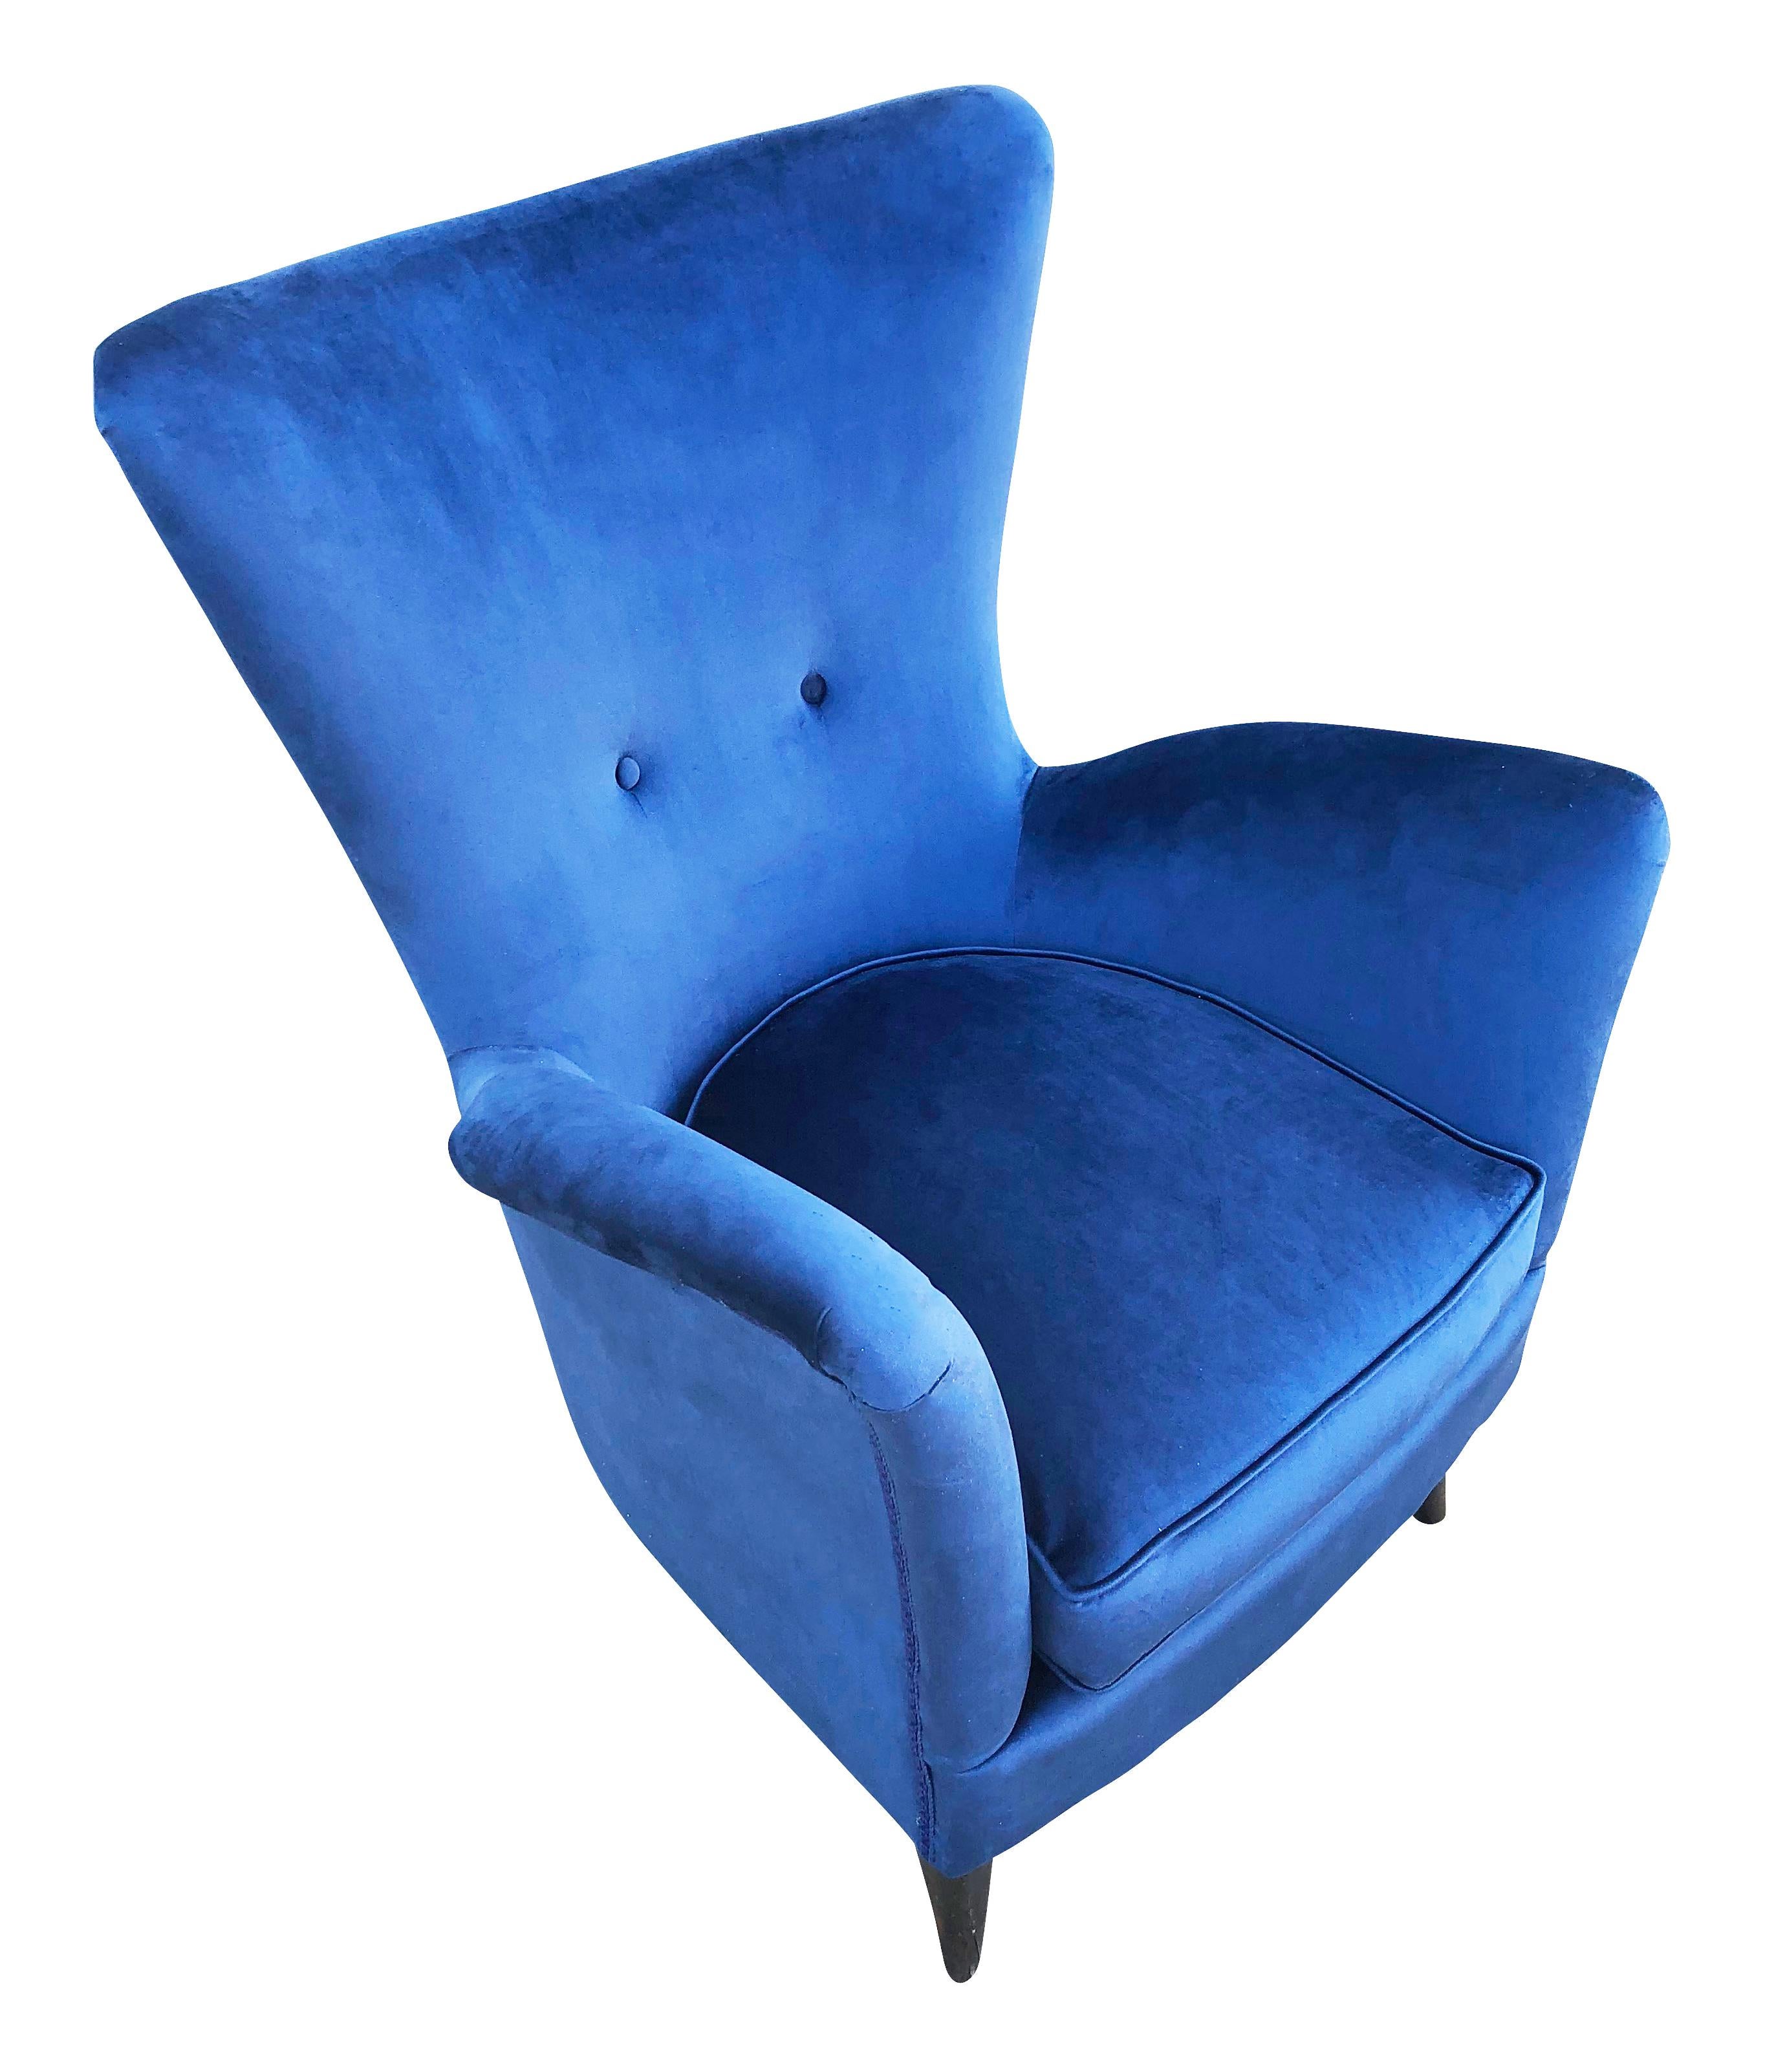 High back Italian midcentury lounge chairs in the manner of Ico Parisi. Recovered in a dark blue velvet. Price listed is for the pair but they can be split upon request.

Condition: Minor wear consistent with age and use. Recently